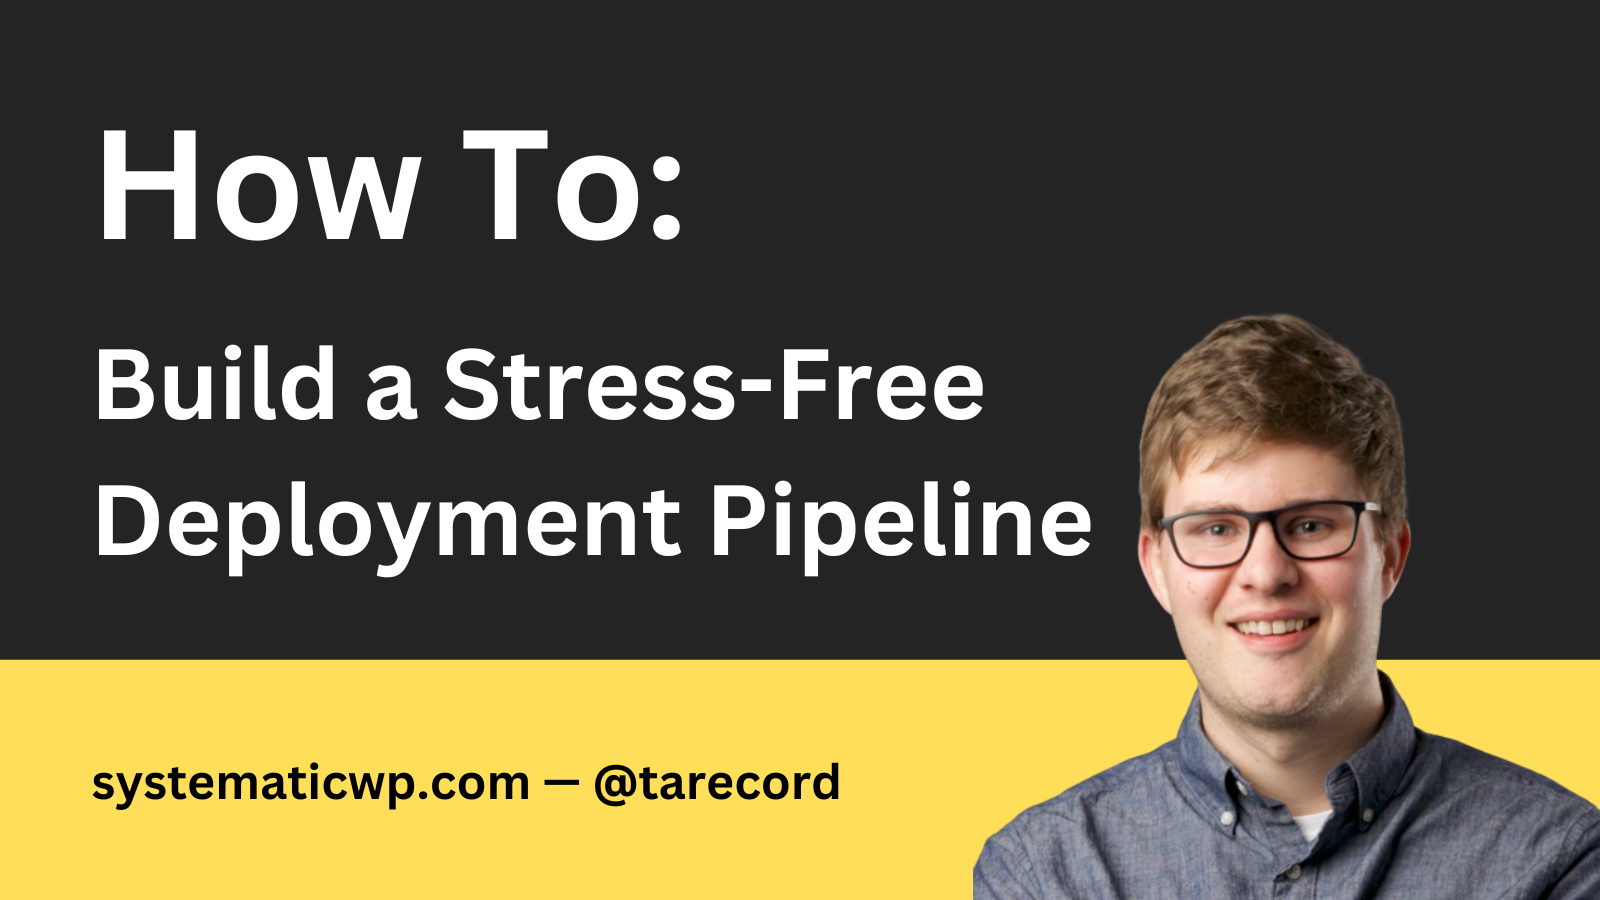 Building a Stress-Free Deployment Pipeline